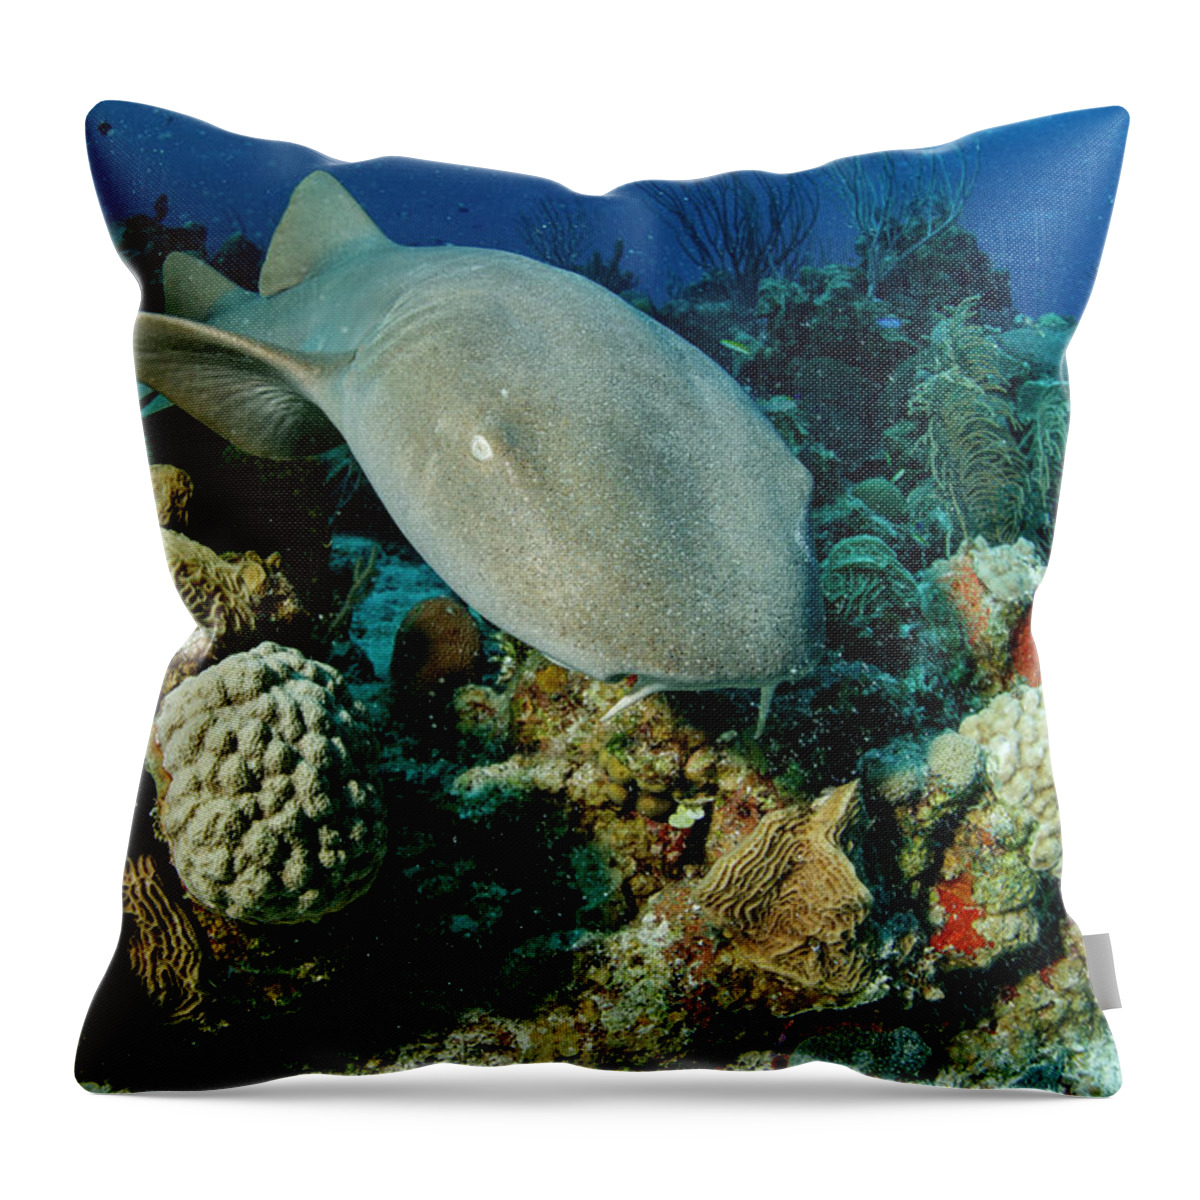 Animal Throw Pillow featuring the photograph Nurse Shark Swimming Over Reef. Chinchorro Banks Biosphere by Franco Banfi / Naturepl.com